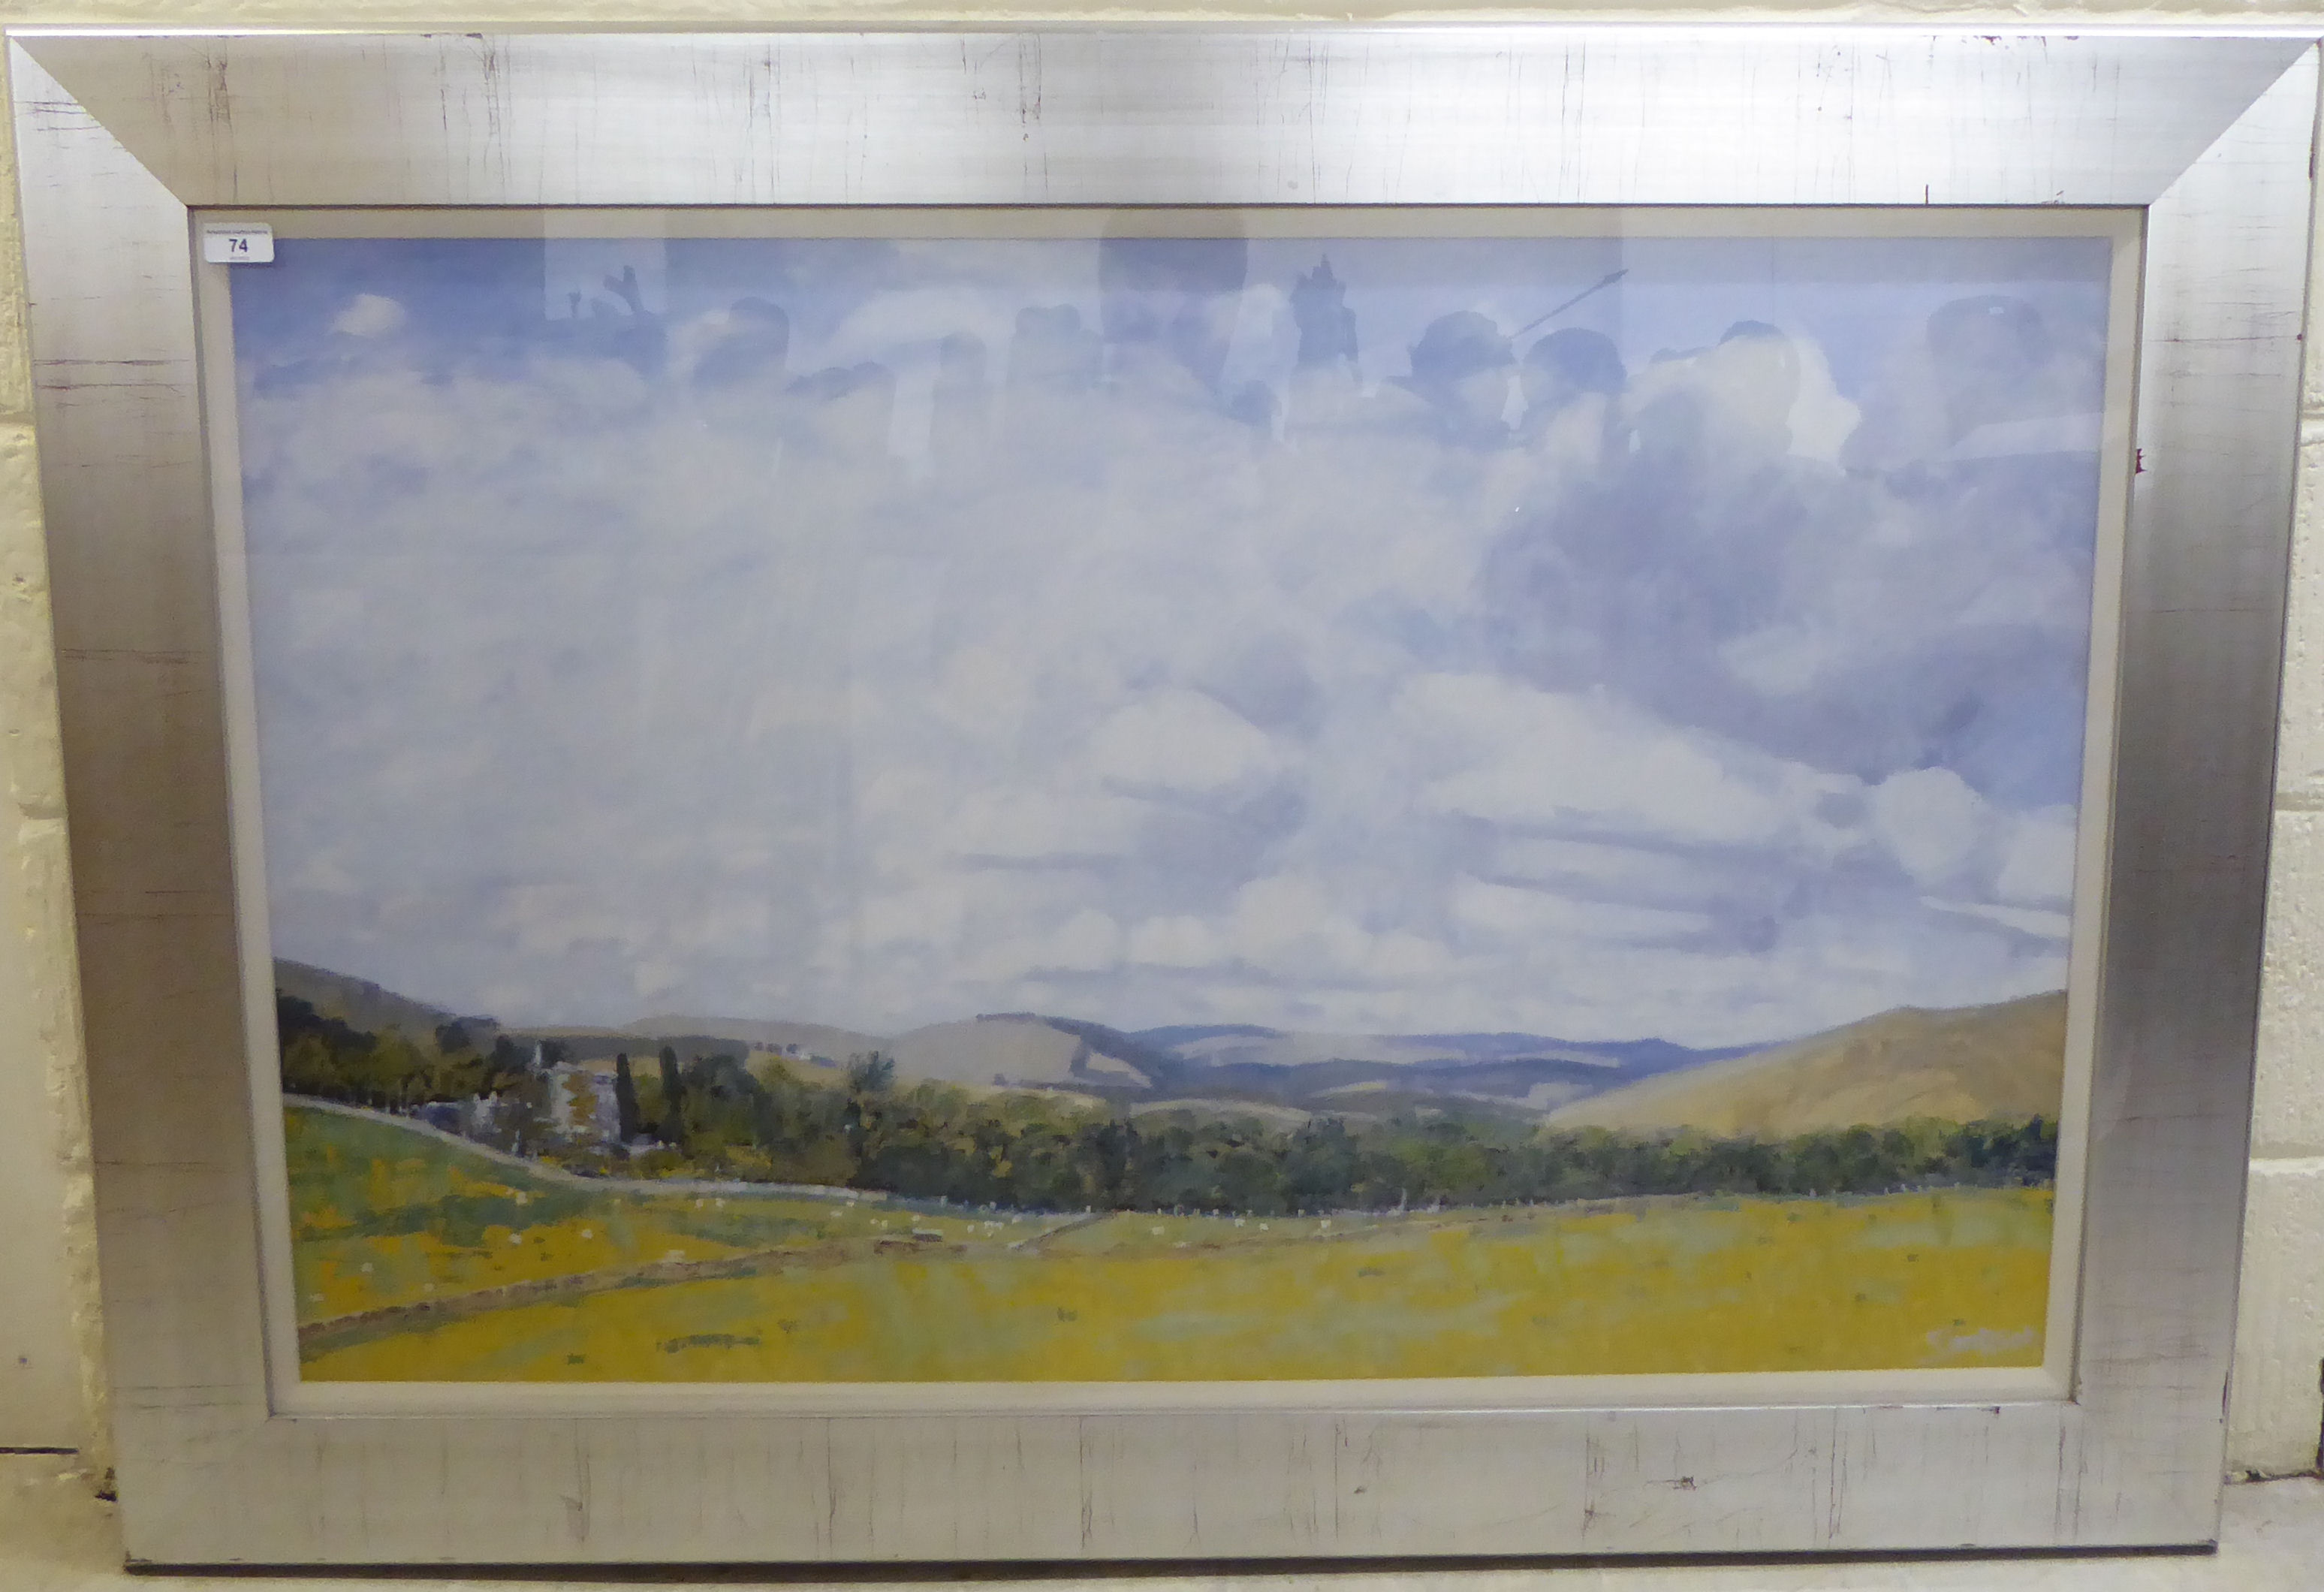 After Simpson - an open landscape with hills beyond  coloured print  26" x 41"  framed